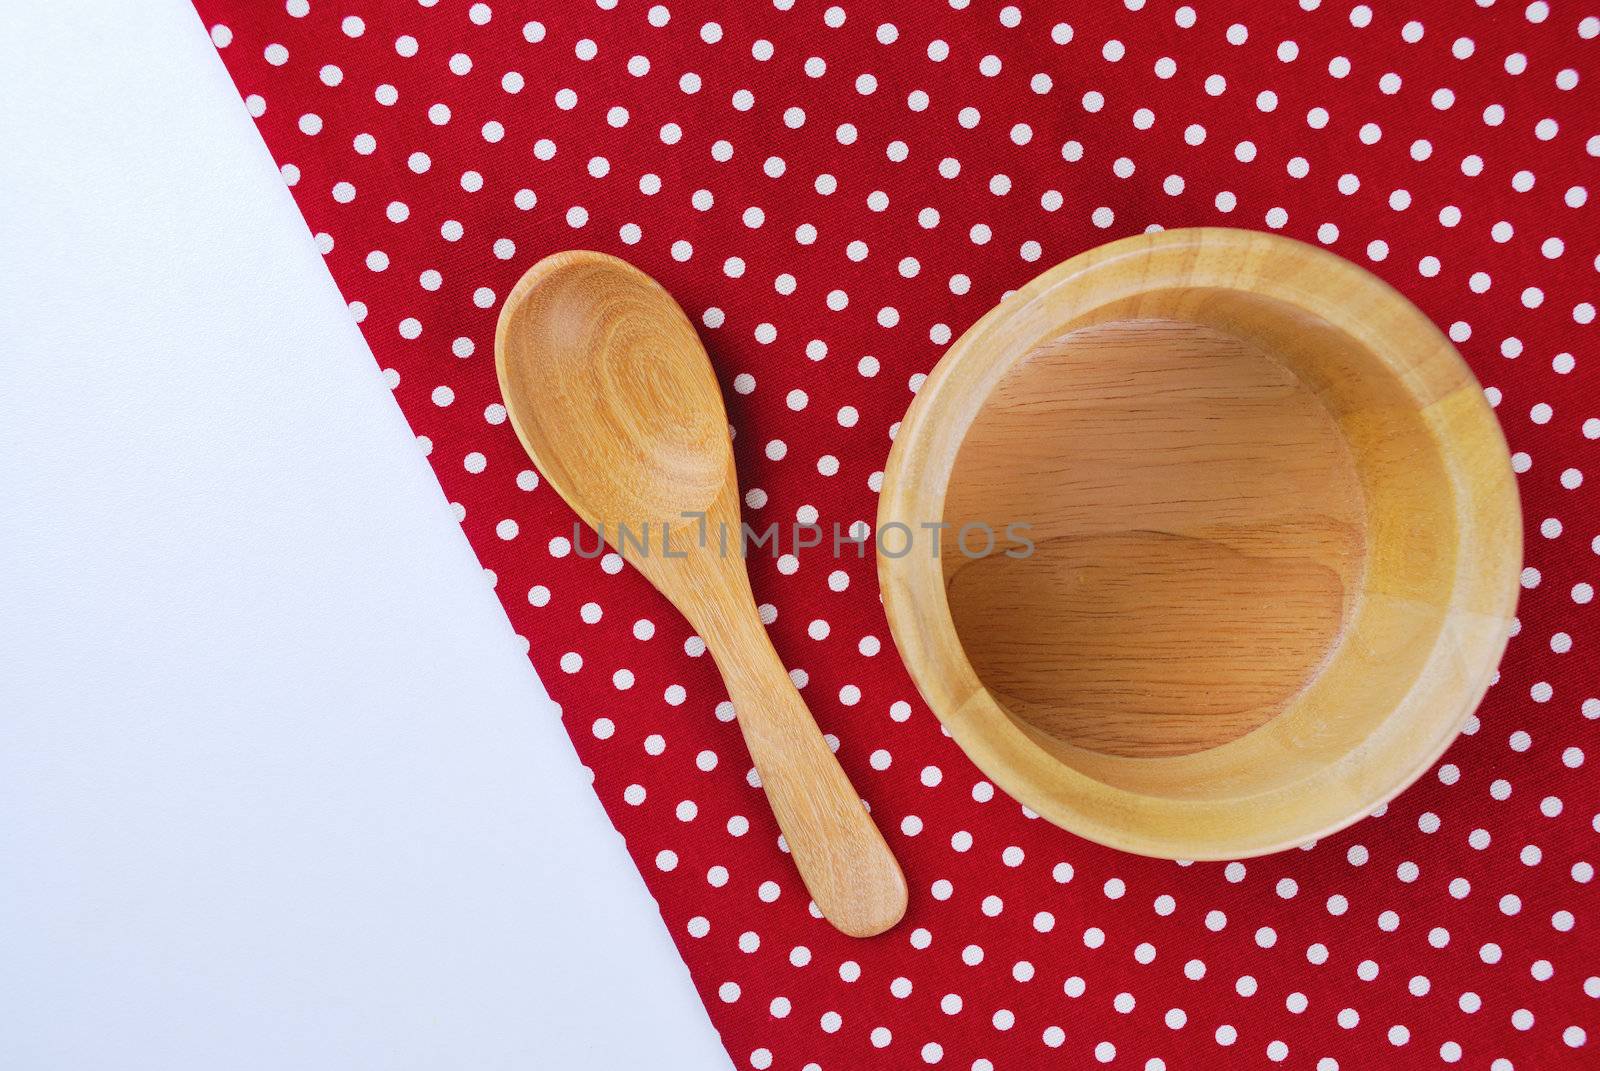 Wooden bowl, tablecloth, spoon, fork on table background  by teen00000